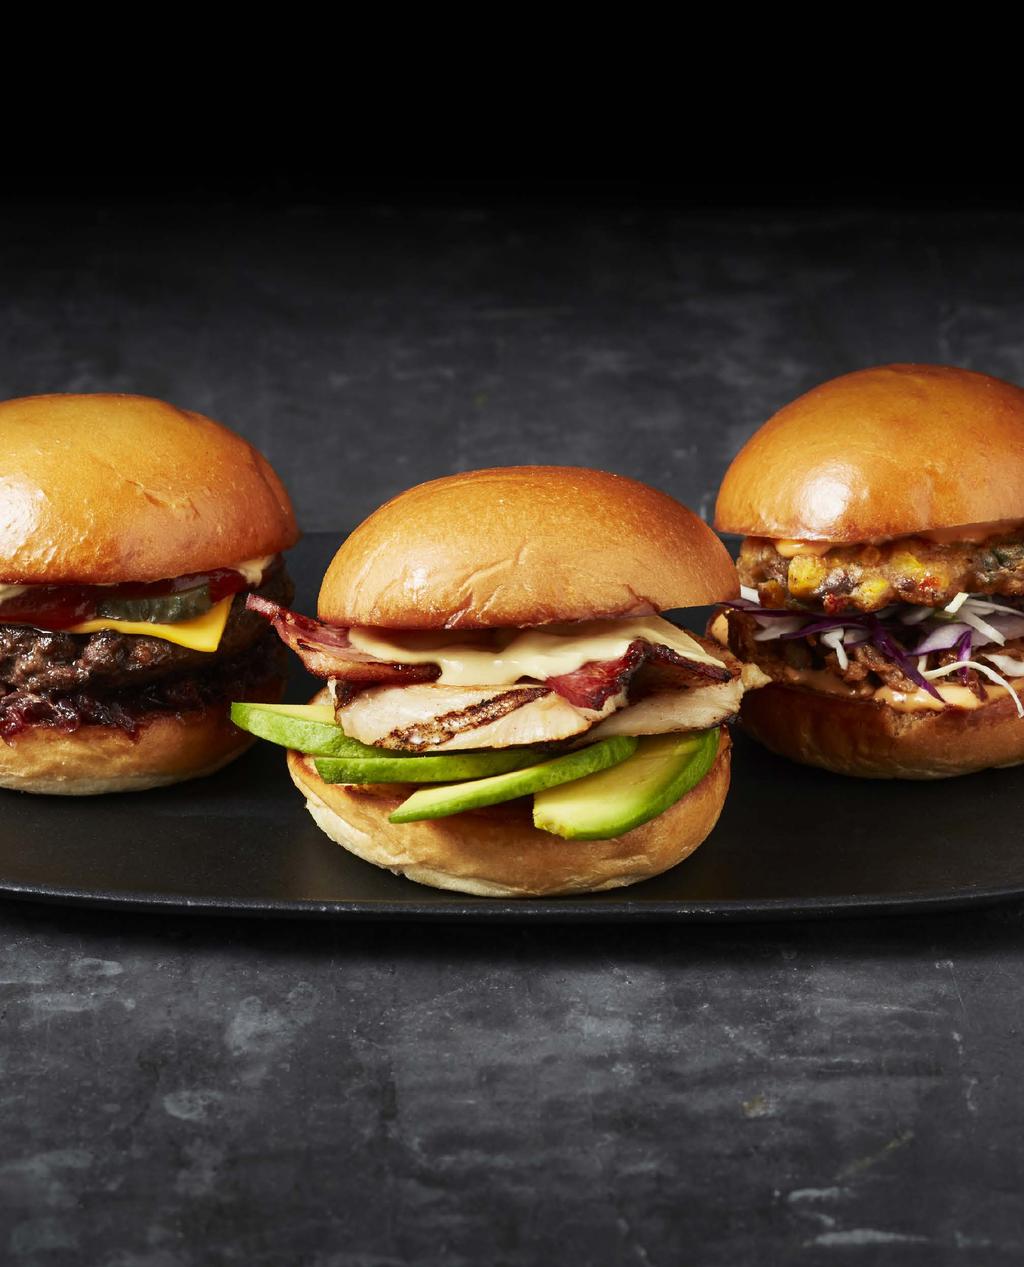 TRIO OF SLIDERS Don t go too heavy, Wolf Blass Merlot won t overpower these great options Classic Cheeseburger.